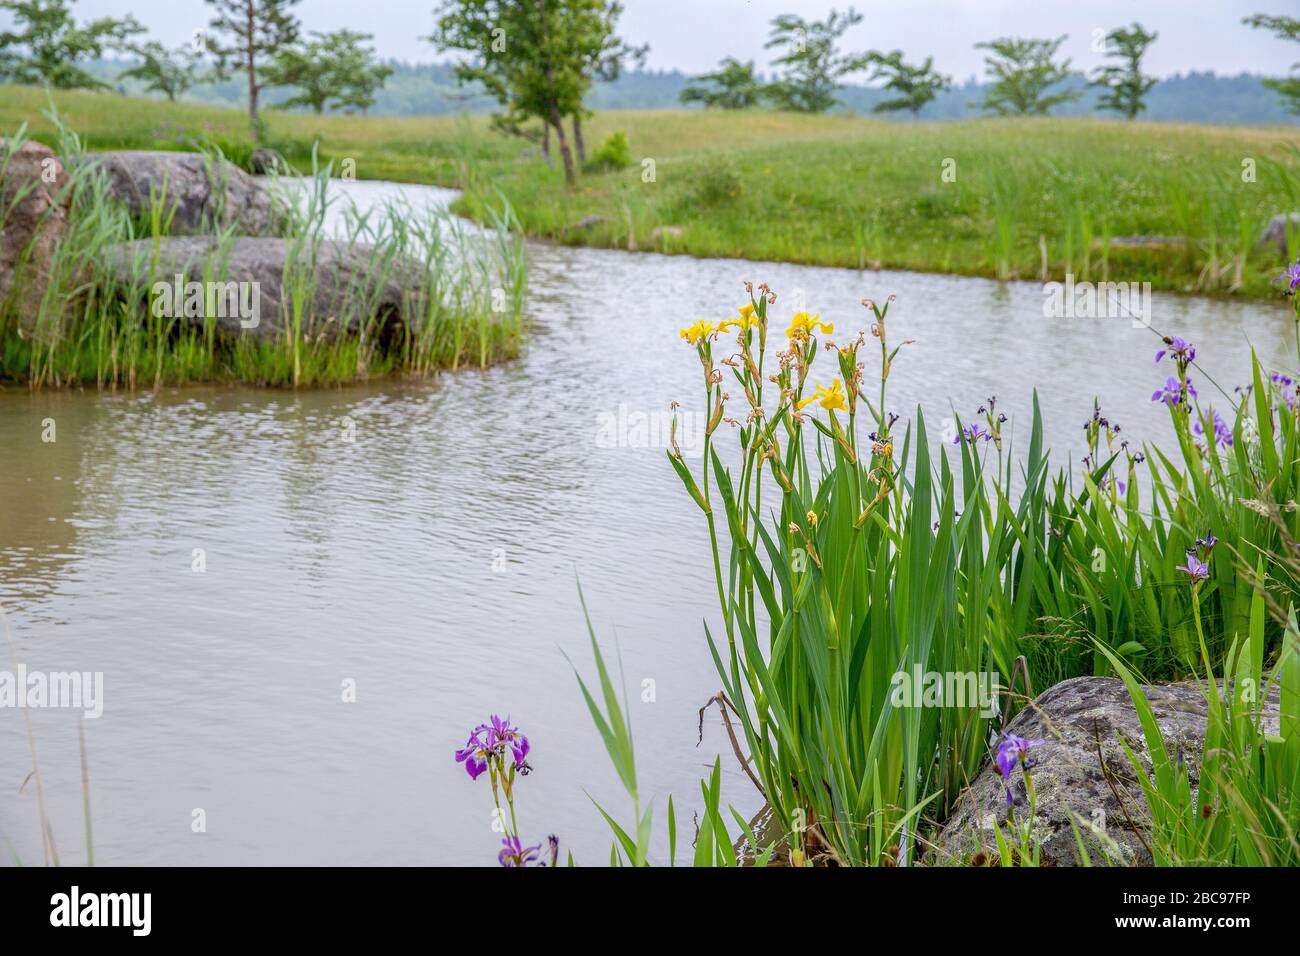 Blooming irises in a Japanese garden near Palanga. Pond and small pines. Stock Photo